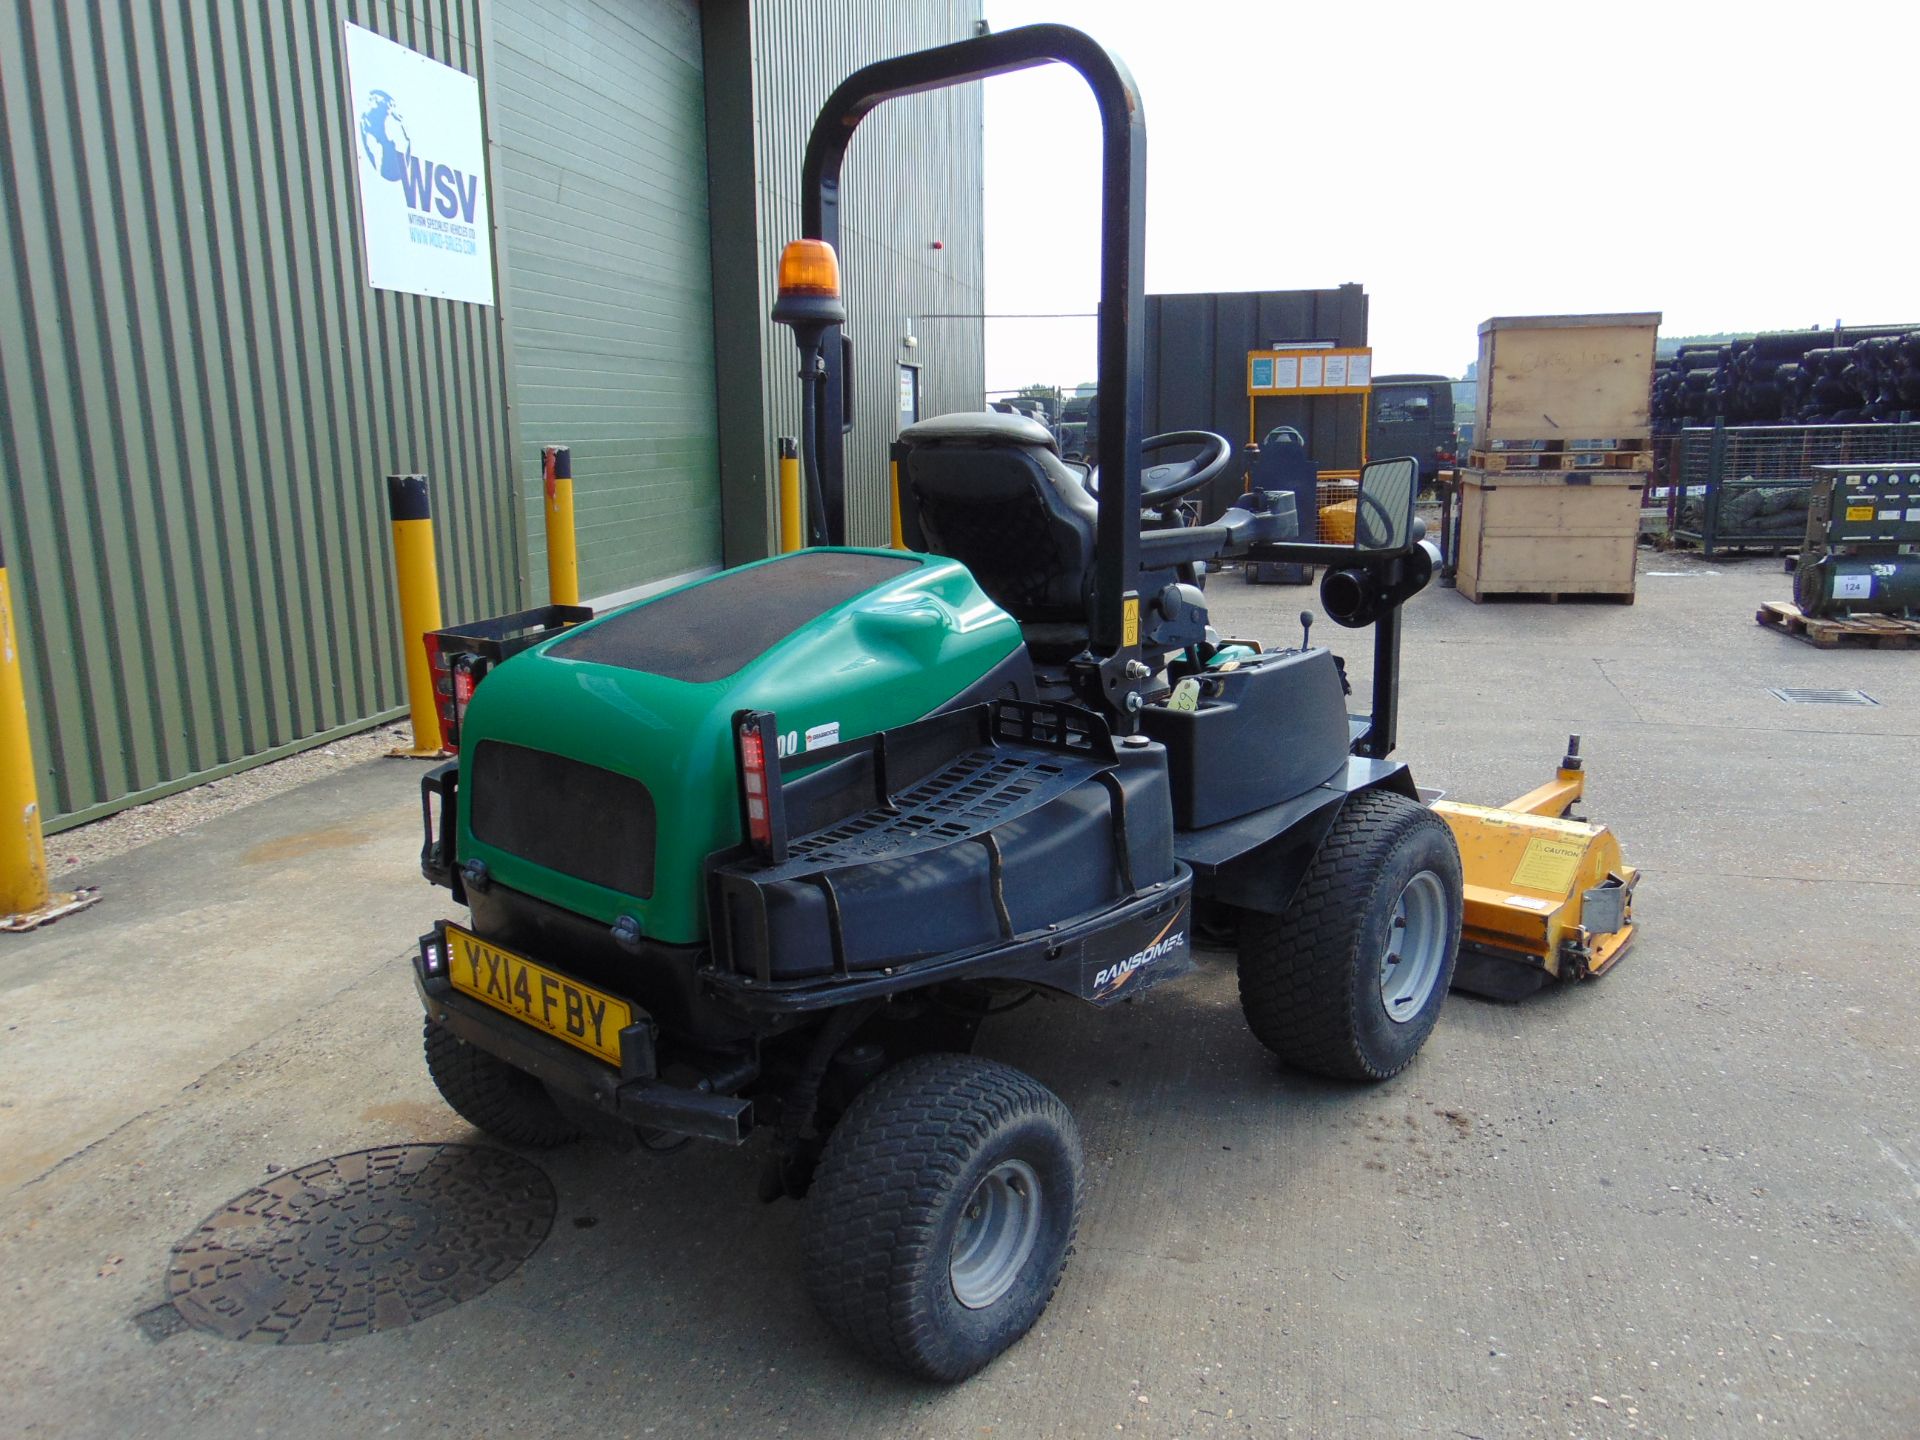 2014 Ransomes HR300 C/W Muthing Outfront Flail Mower ONLY 3,489 Hours! - Image 8 of 22